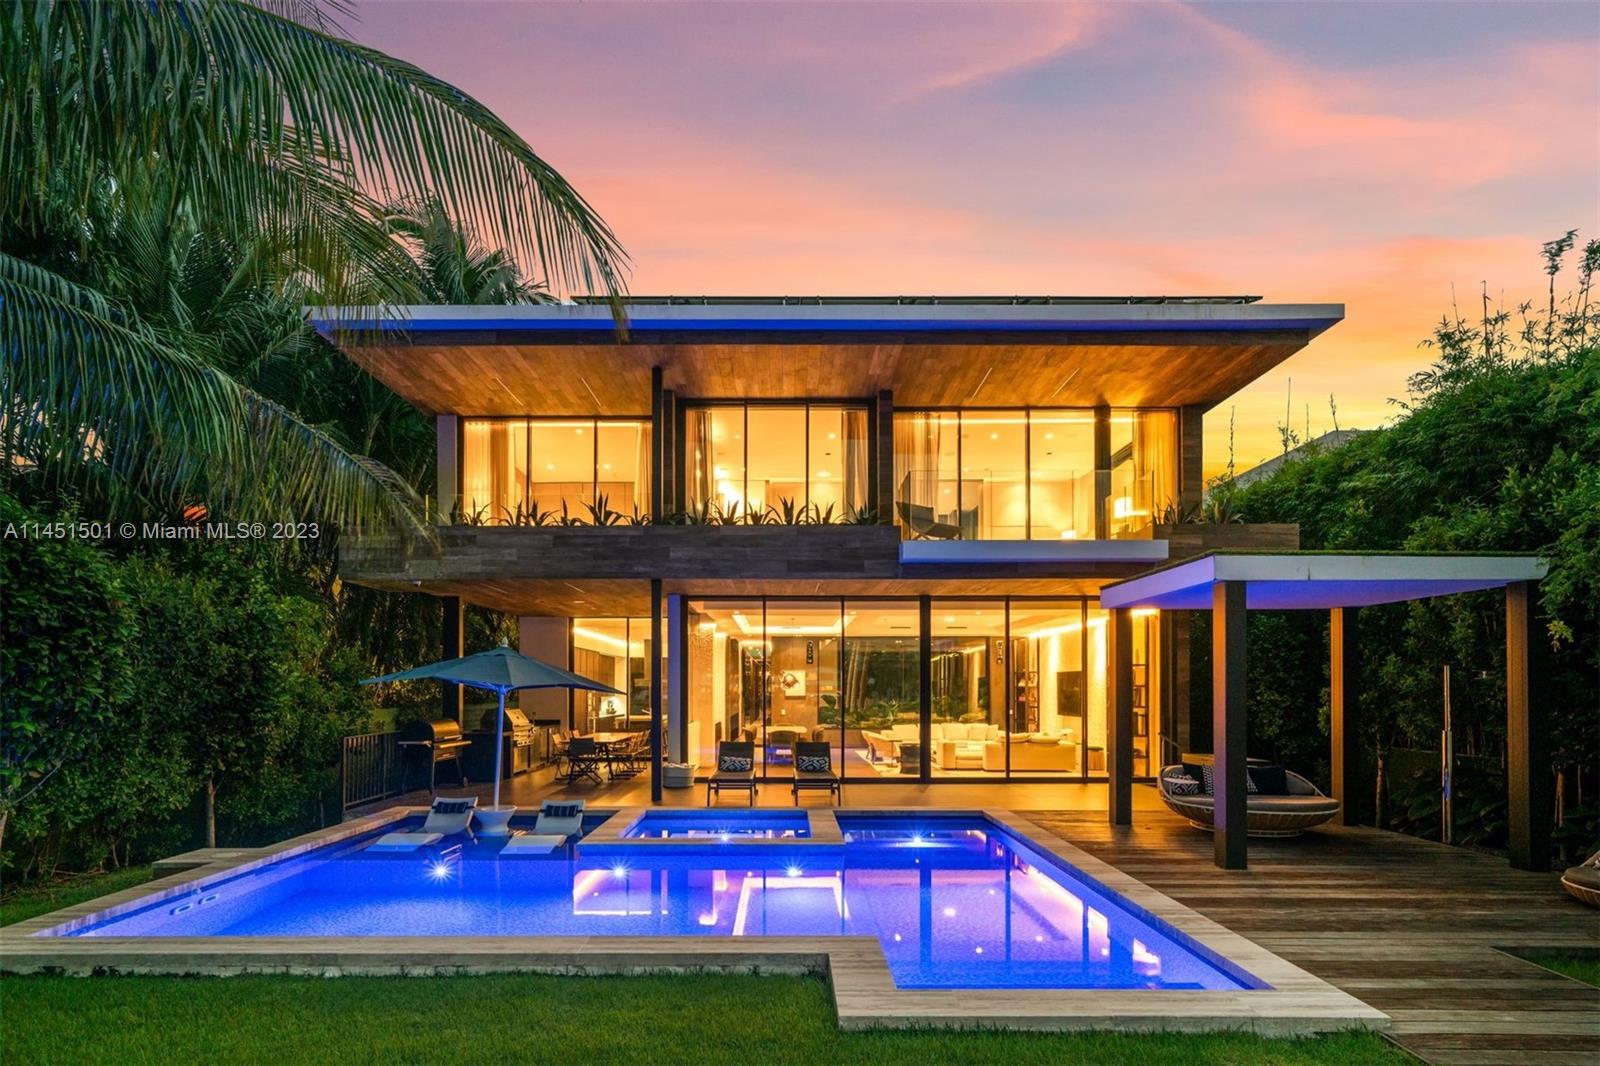 Embrace a modern, tropical lifestyle on the Venetian Islands in this elegant, solar-powered home designed by Max Strang featuring exquisite interiors by Studio ABM Design. Encapsulating over 10,500 sq ft with 60 ft of waterfront, this architectural gem seamlessly integrates indoor and outdoor spaces for the premier island living experience. Expertly weaving wood, stone, and glass finishes throughout, this home exudes entertaining possibilities with a roof deck with eastern sunrise and downtown sunset panoramic views, home theater, multiple balconies, and a kitchen equipped with Wolf gas and induction stovetops, twin Sub-zero refrigerators, and built-in wine cooler. Relax by the mosaic-tiled pool, surrounded by the lush landscape and Ipe wood deck with outdoor chef’s kitchen and boat lift.